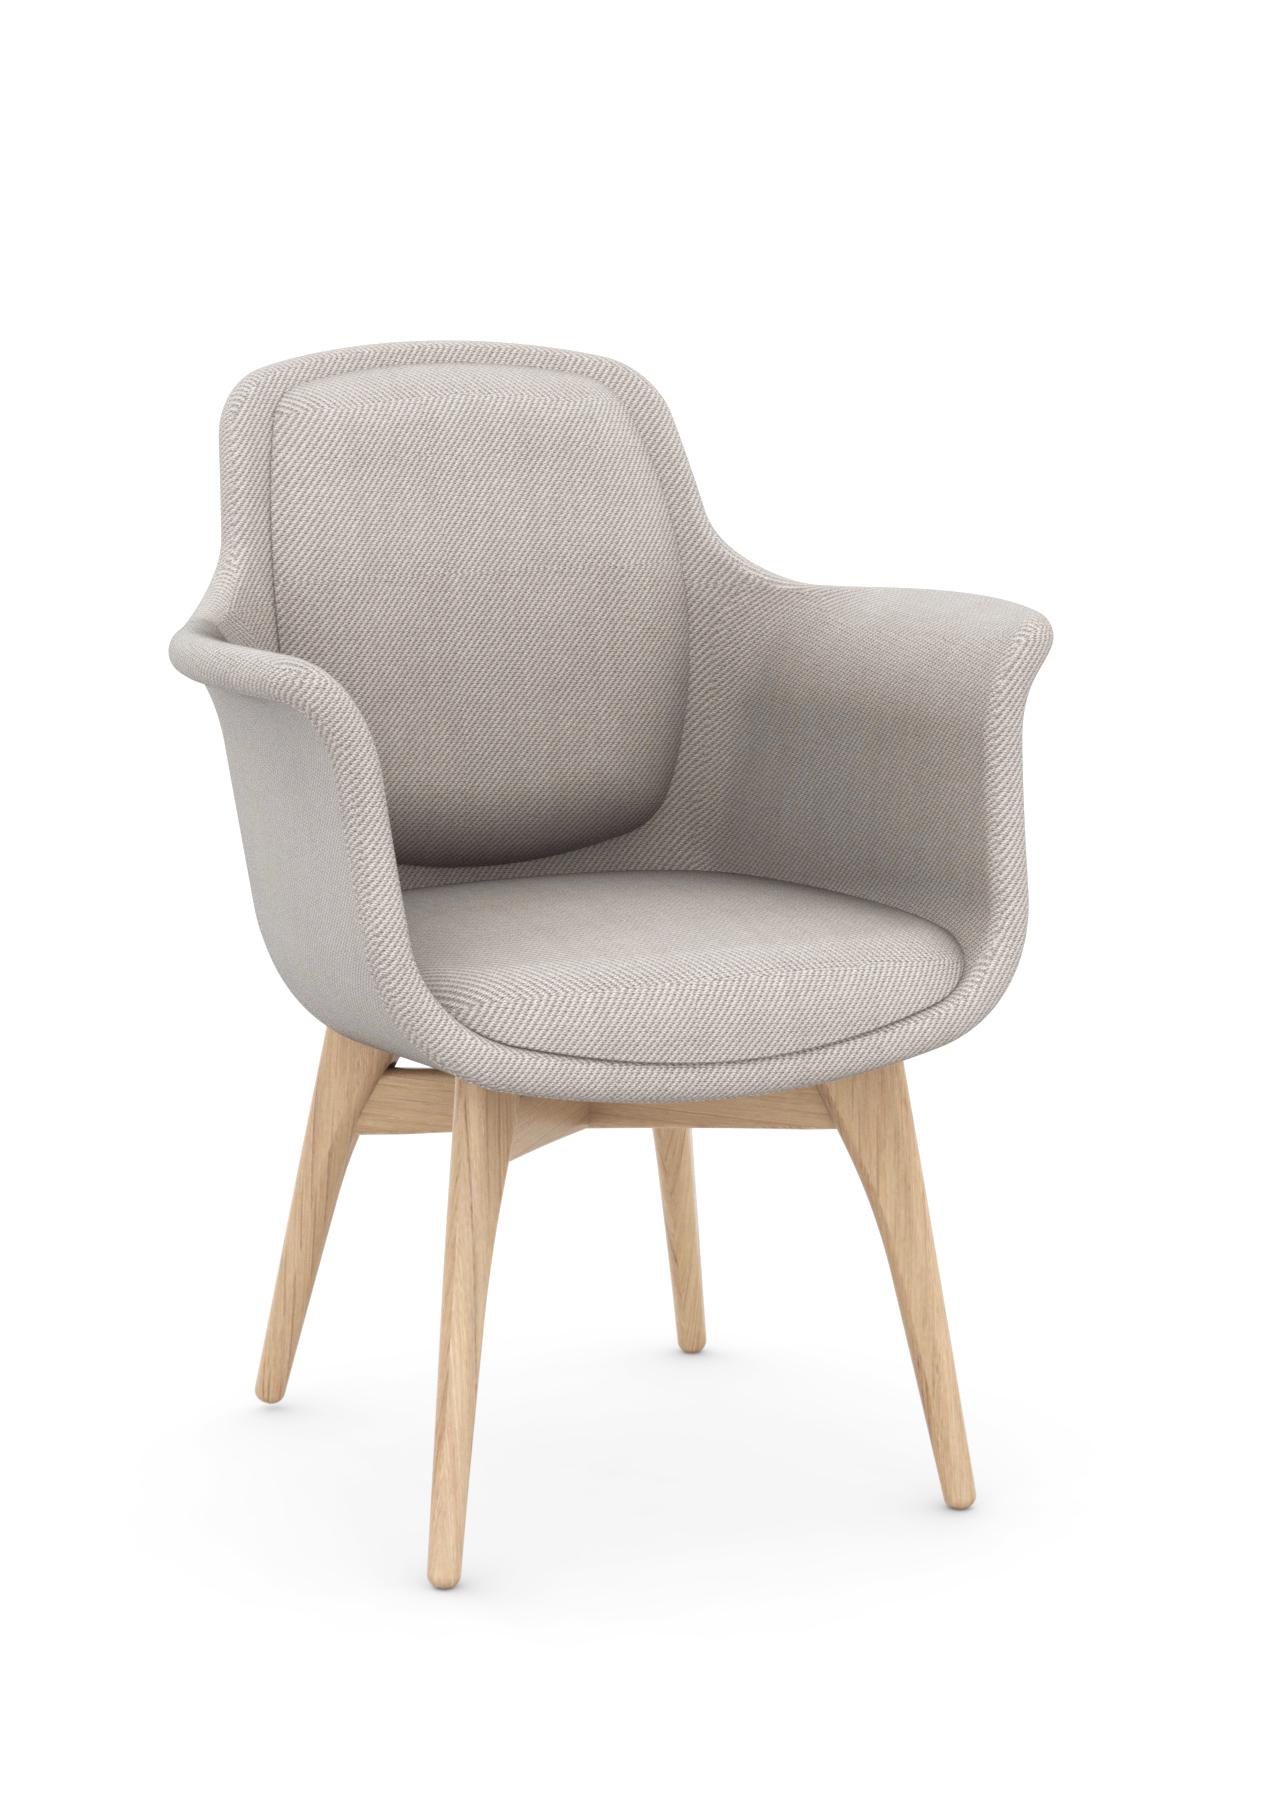 Chidden is designed by Sjoerd Vroonland & Casper Vissers for Revised
A dining chair crafted from solid wood and foamed steel. Steel is used to create the form of the body which is then foamed using polyurethane and upholstered in multiple fabric